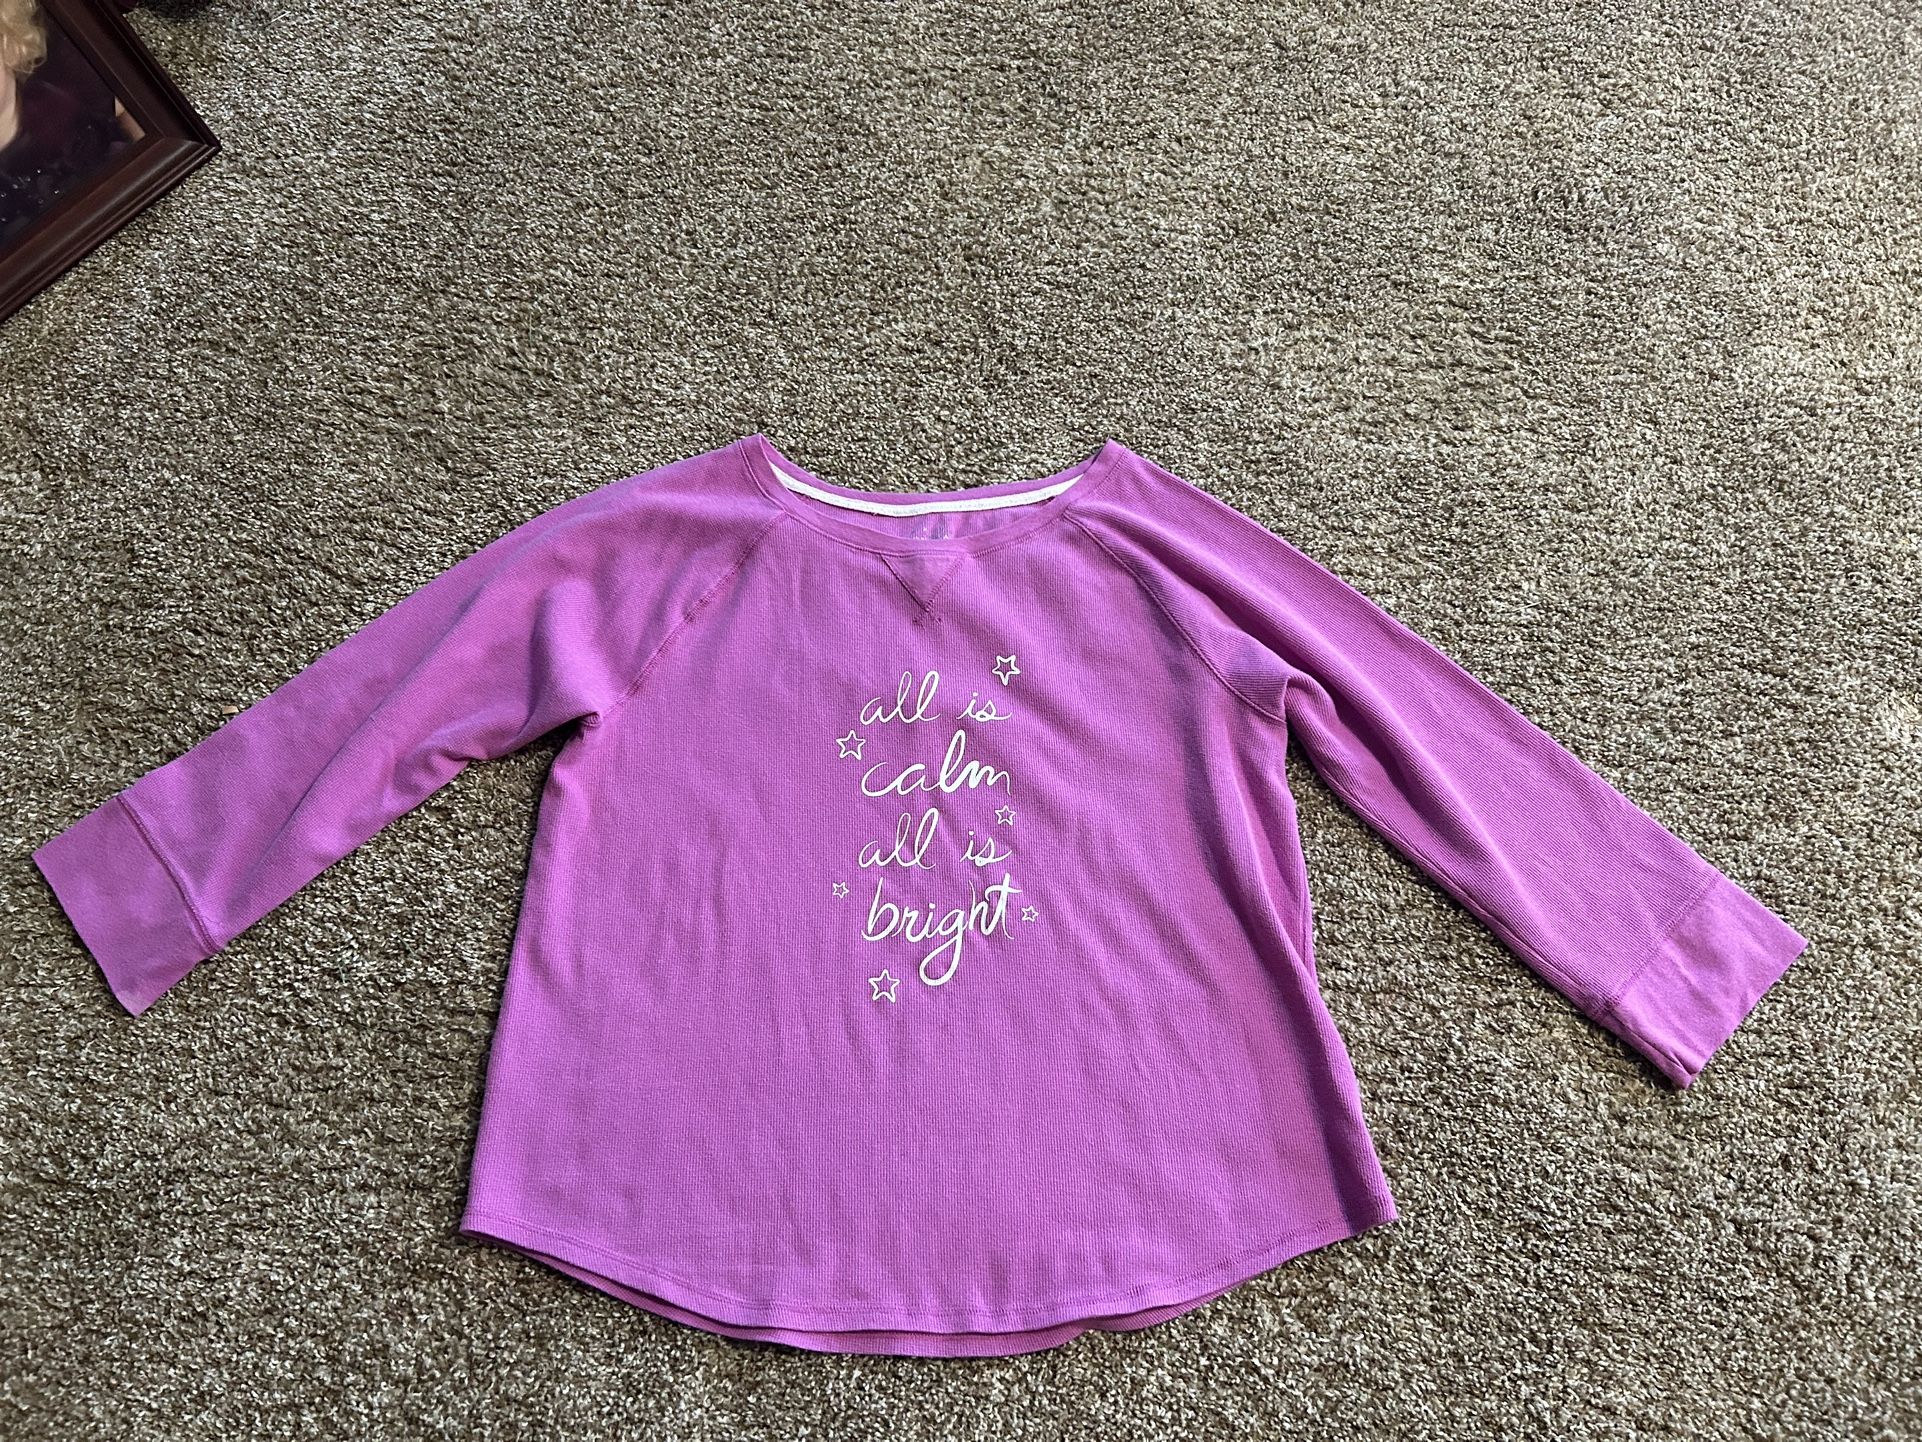 Women 2XL "All is calm, All is bright" Christmas long sleeve t-shirt